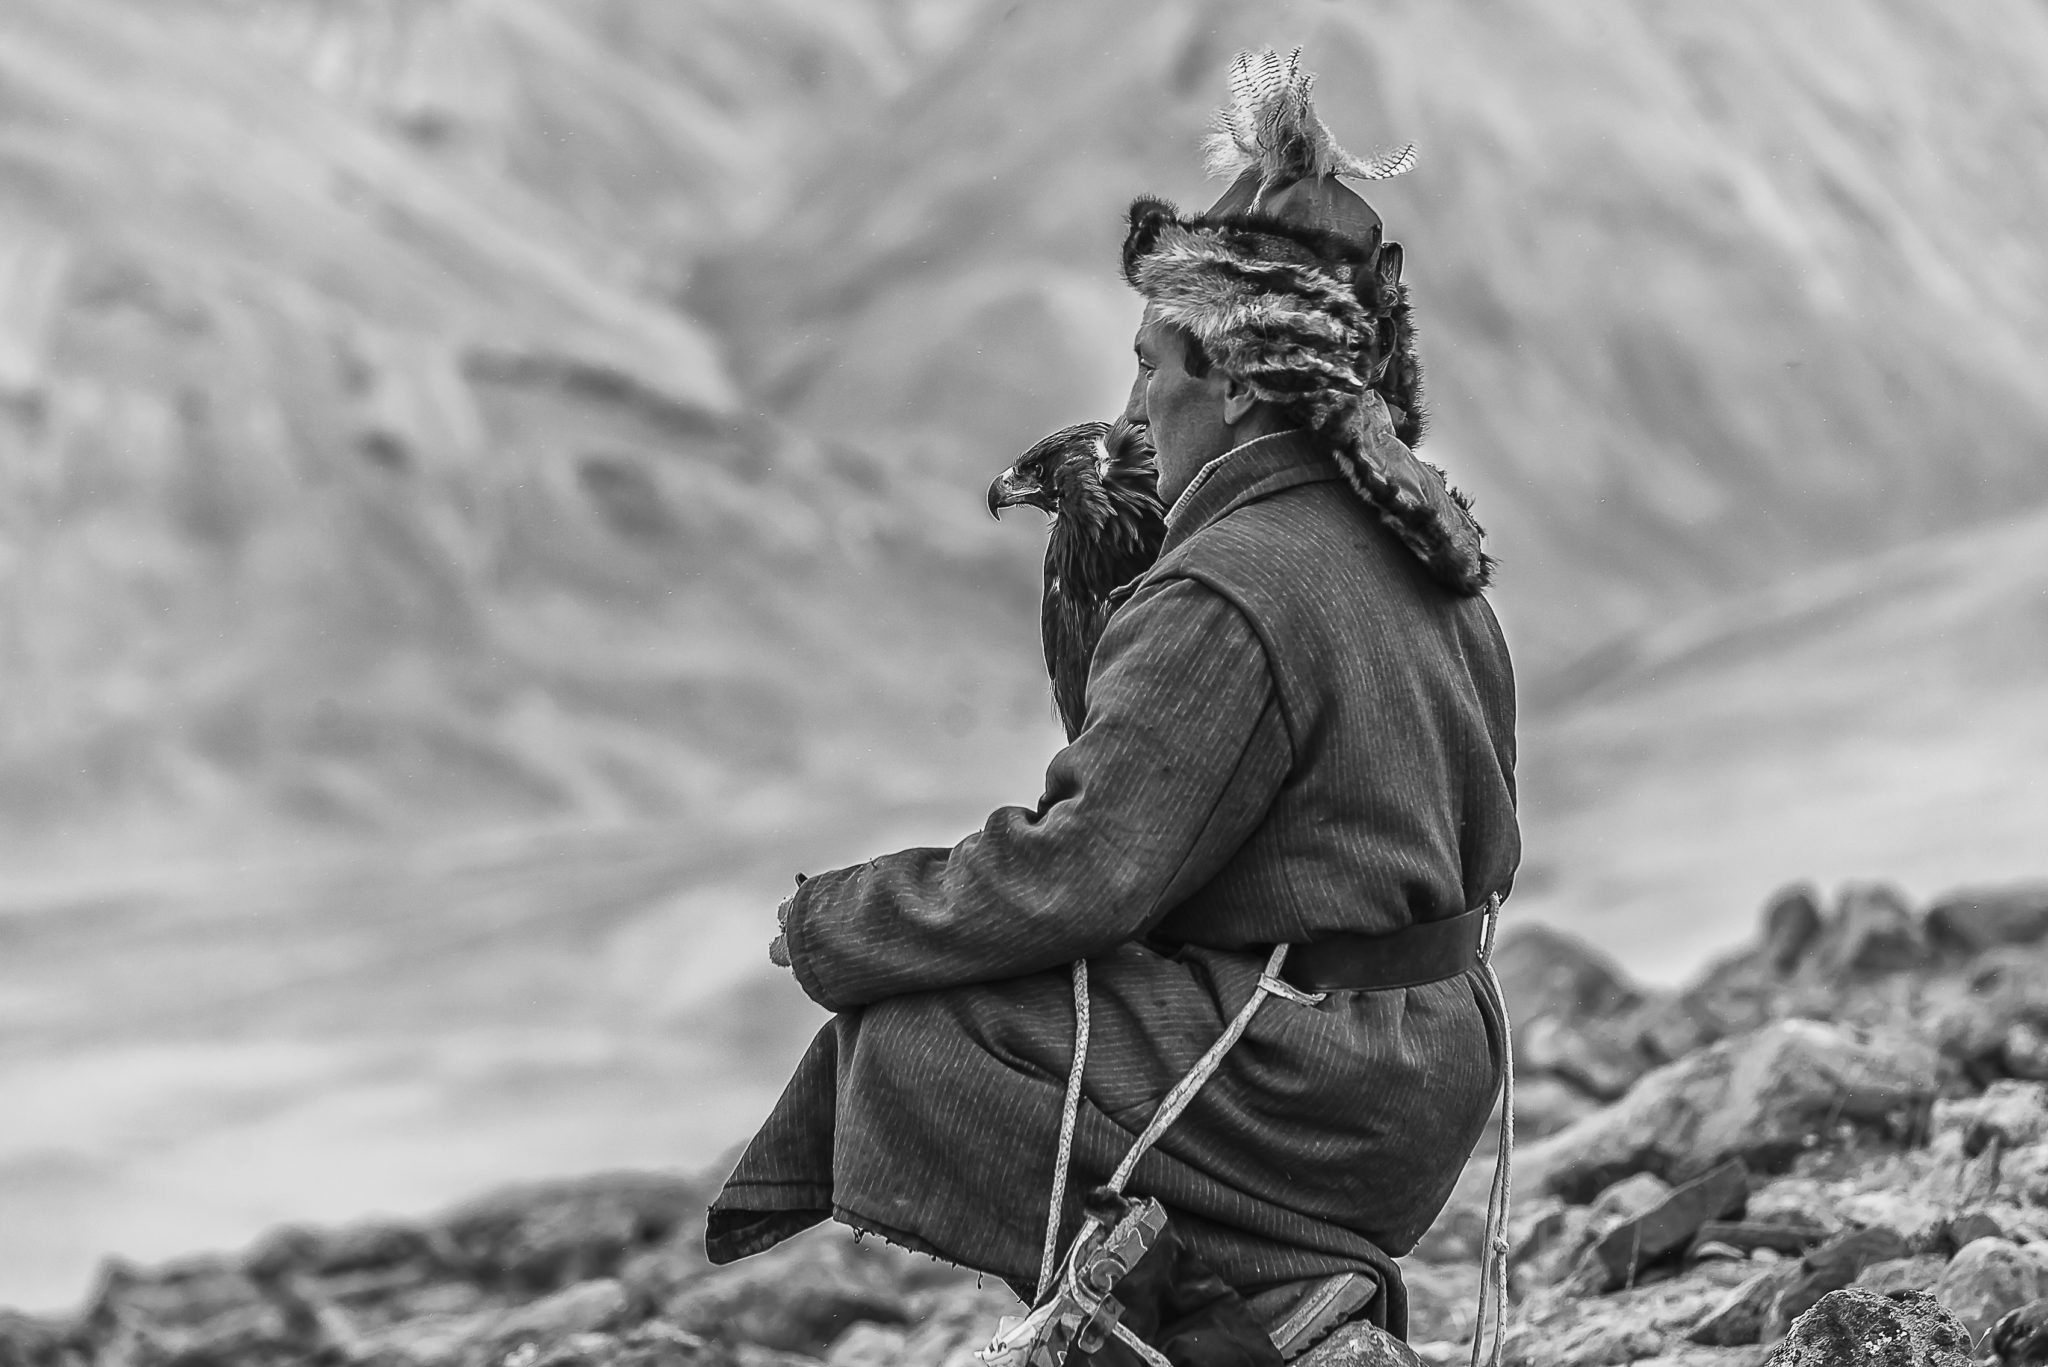 Waiting for the fox – Mongolia